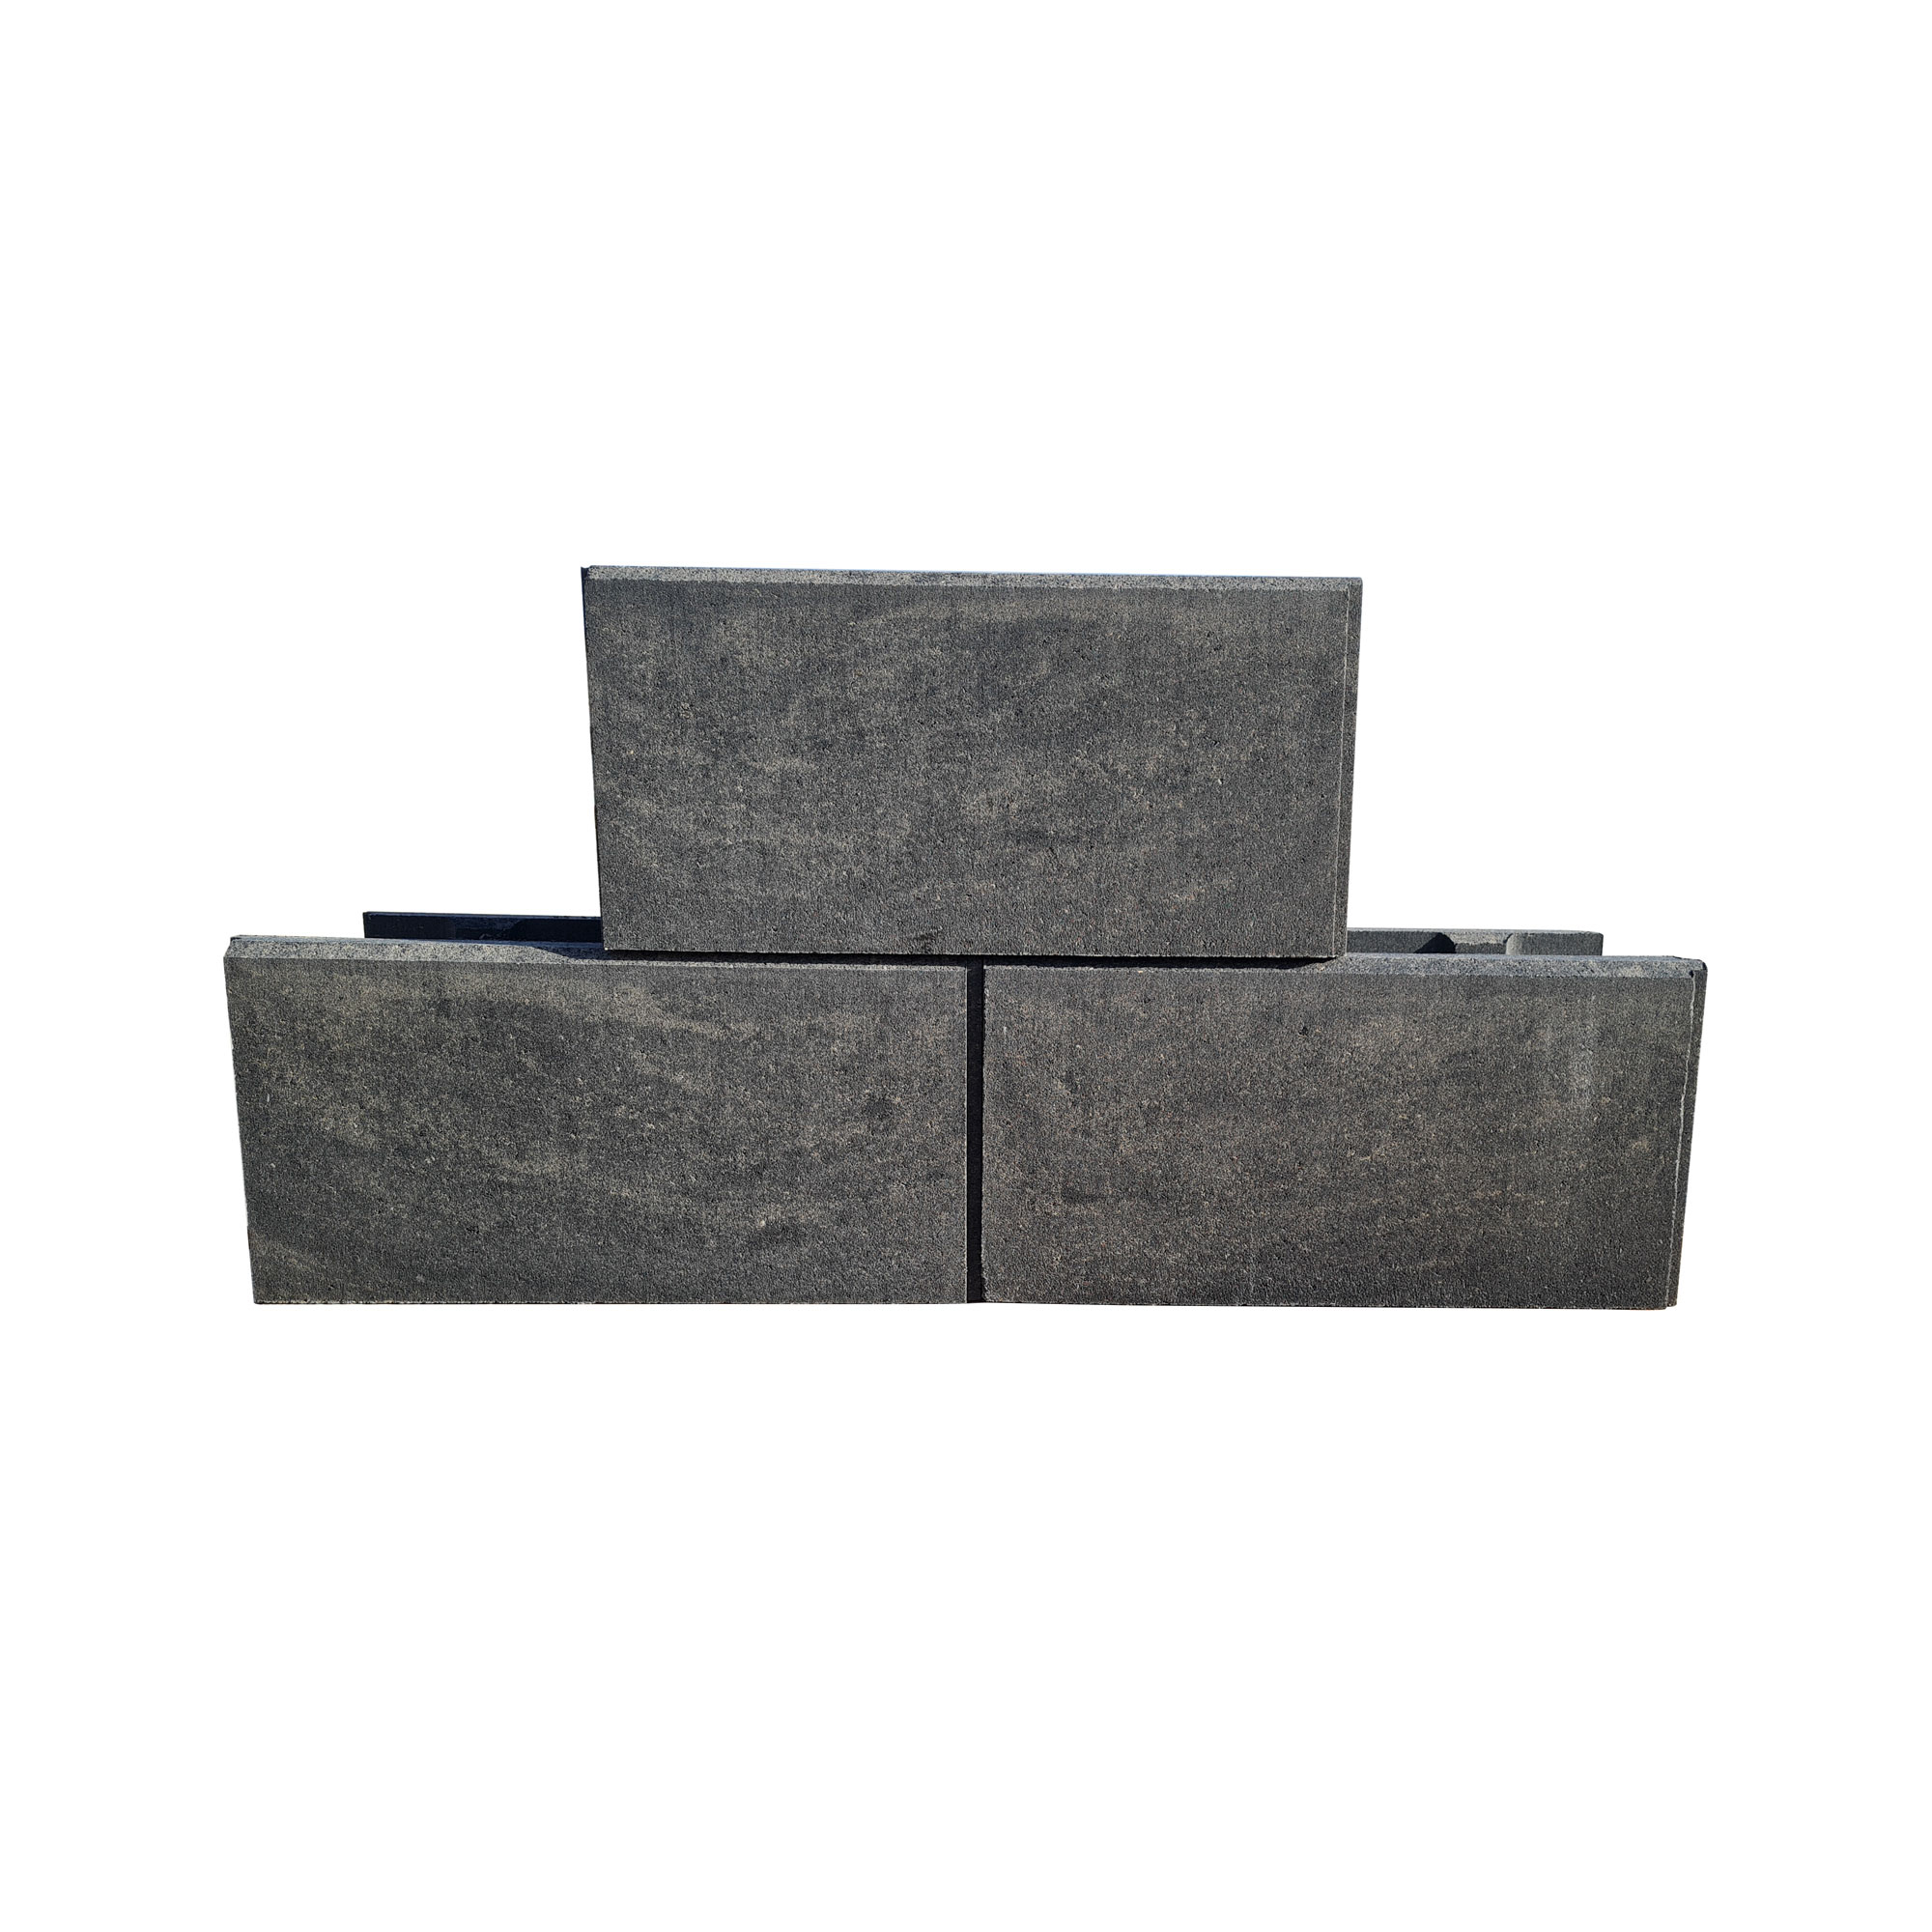 Mauerstein 'T-Wall Slope ' Beton anthrazit 50 x 24 x 25 cm + product picture